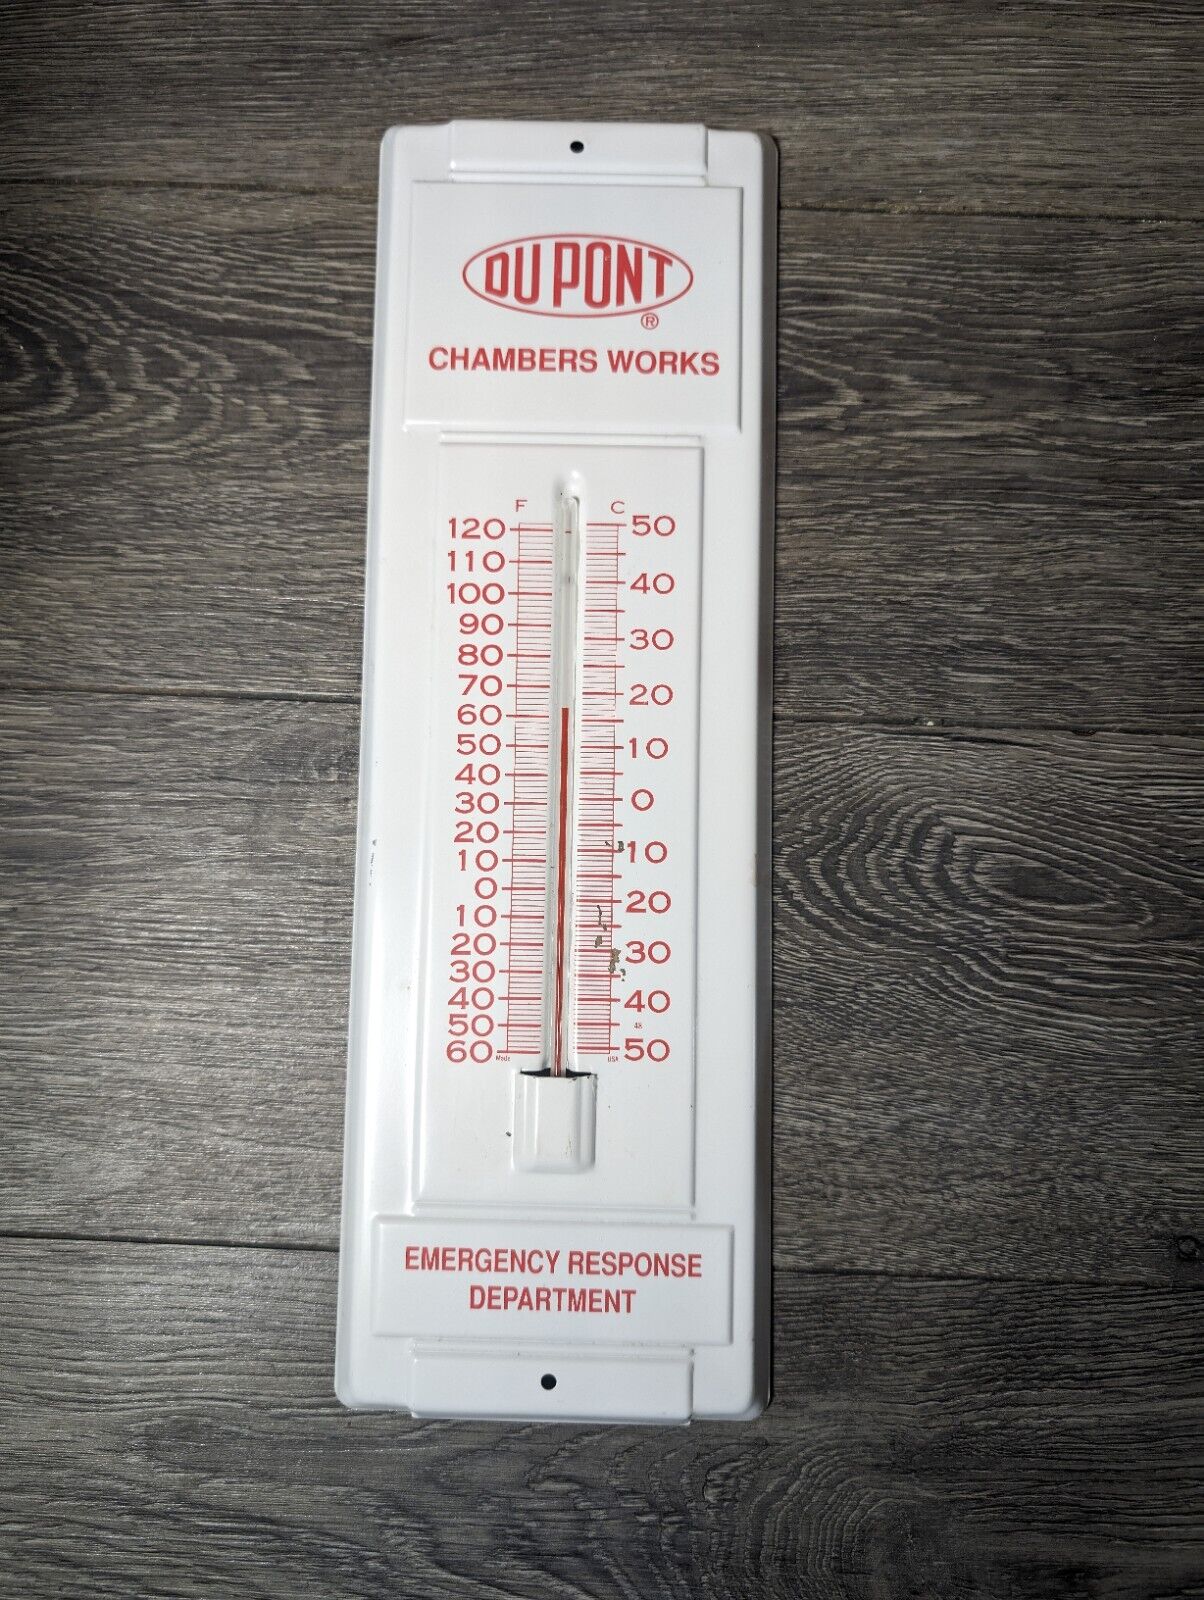 Vintage Dupont Chamber Works Emergency Response Department Thermometer